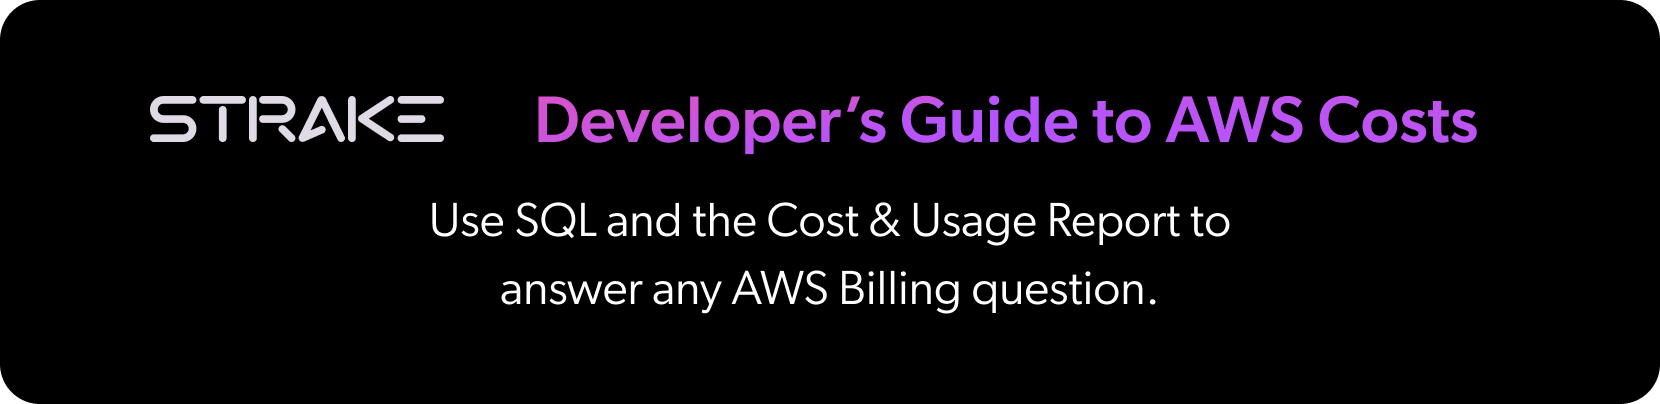 Developer's Guide to AWS Costs Banner